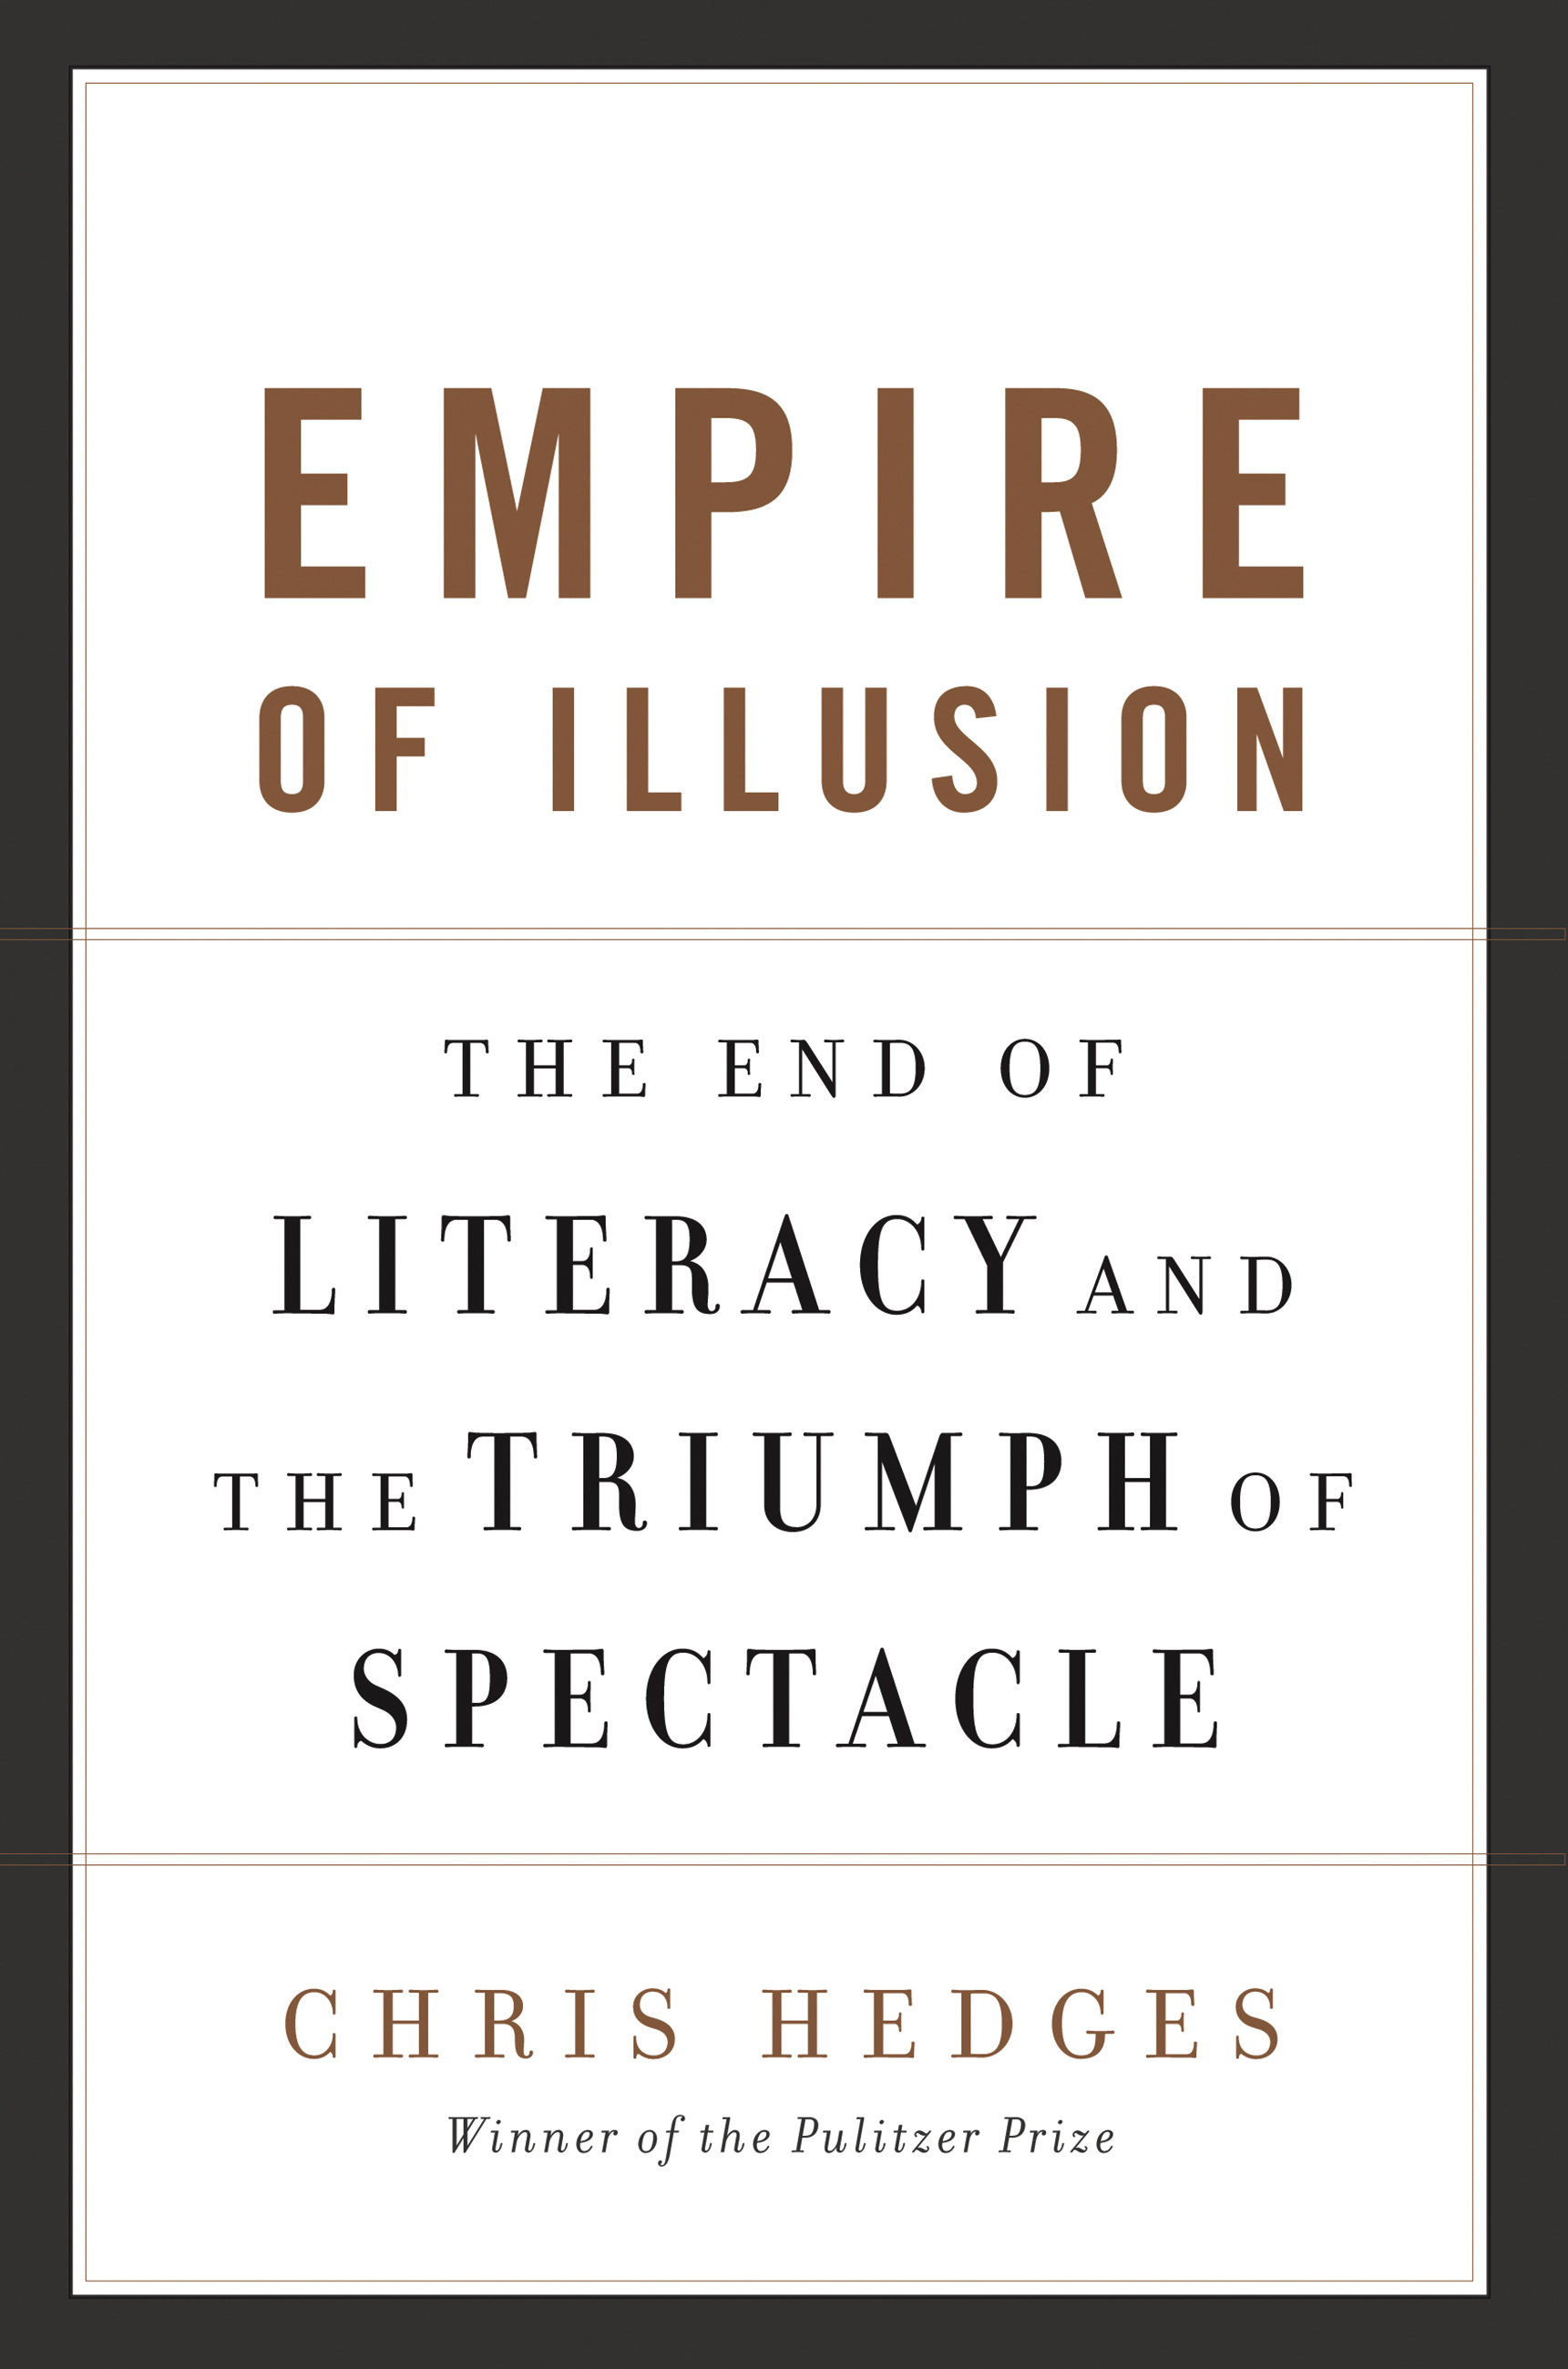 Empire of Illusion by Chris Hedges Hachette Book Group pic